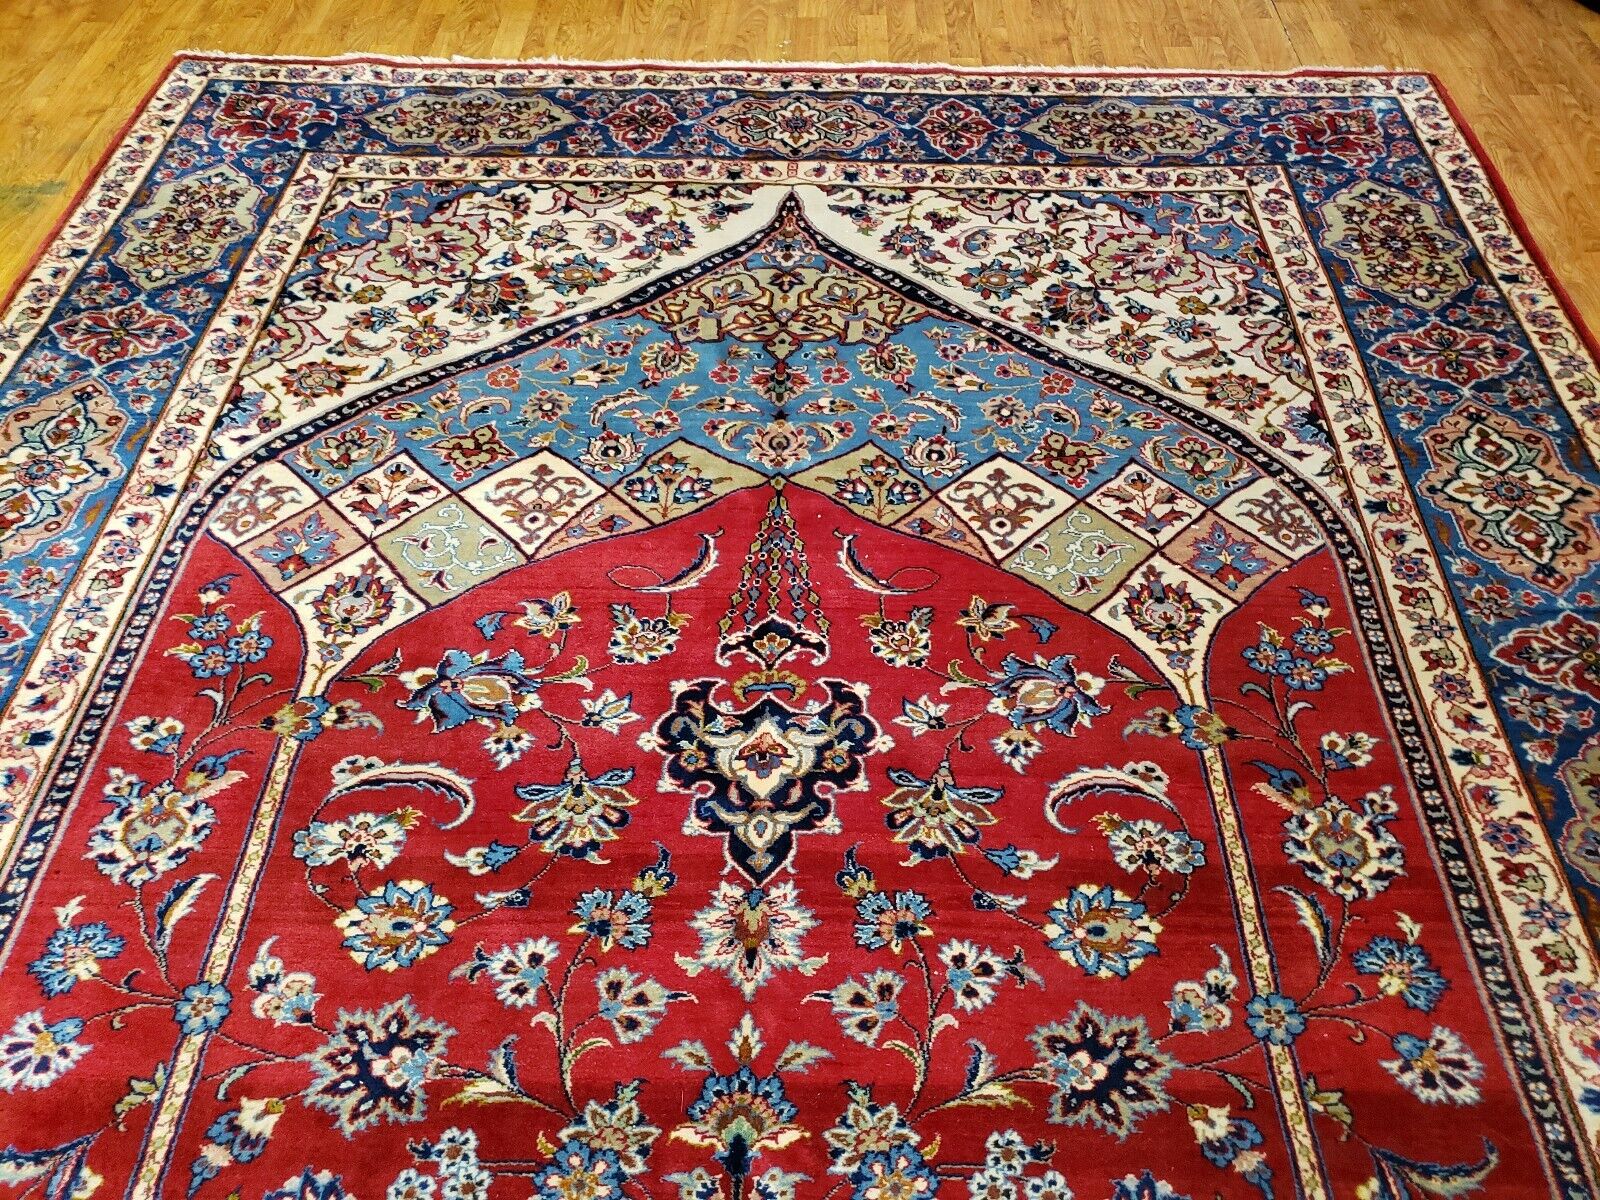  ISFAHANi handwoven Nain rug 1950s state sale hand knotted rug 9x12 red & blue 